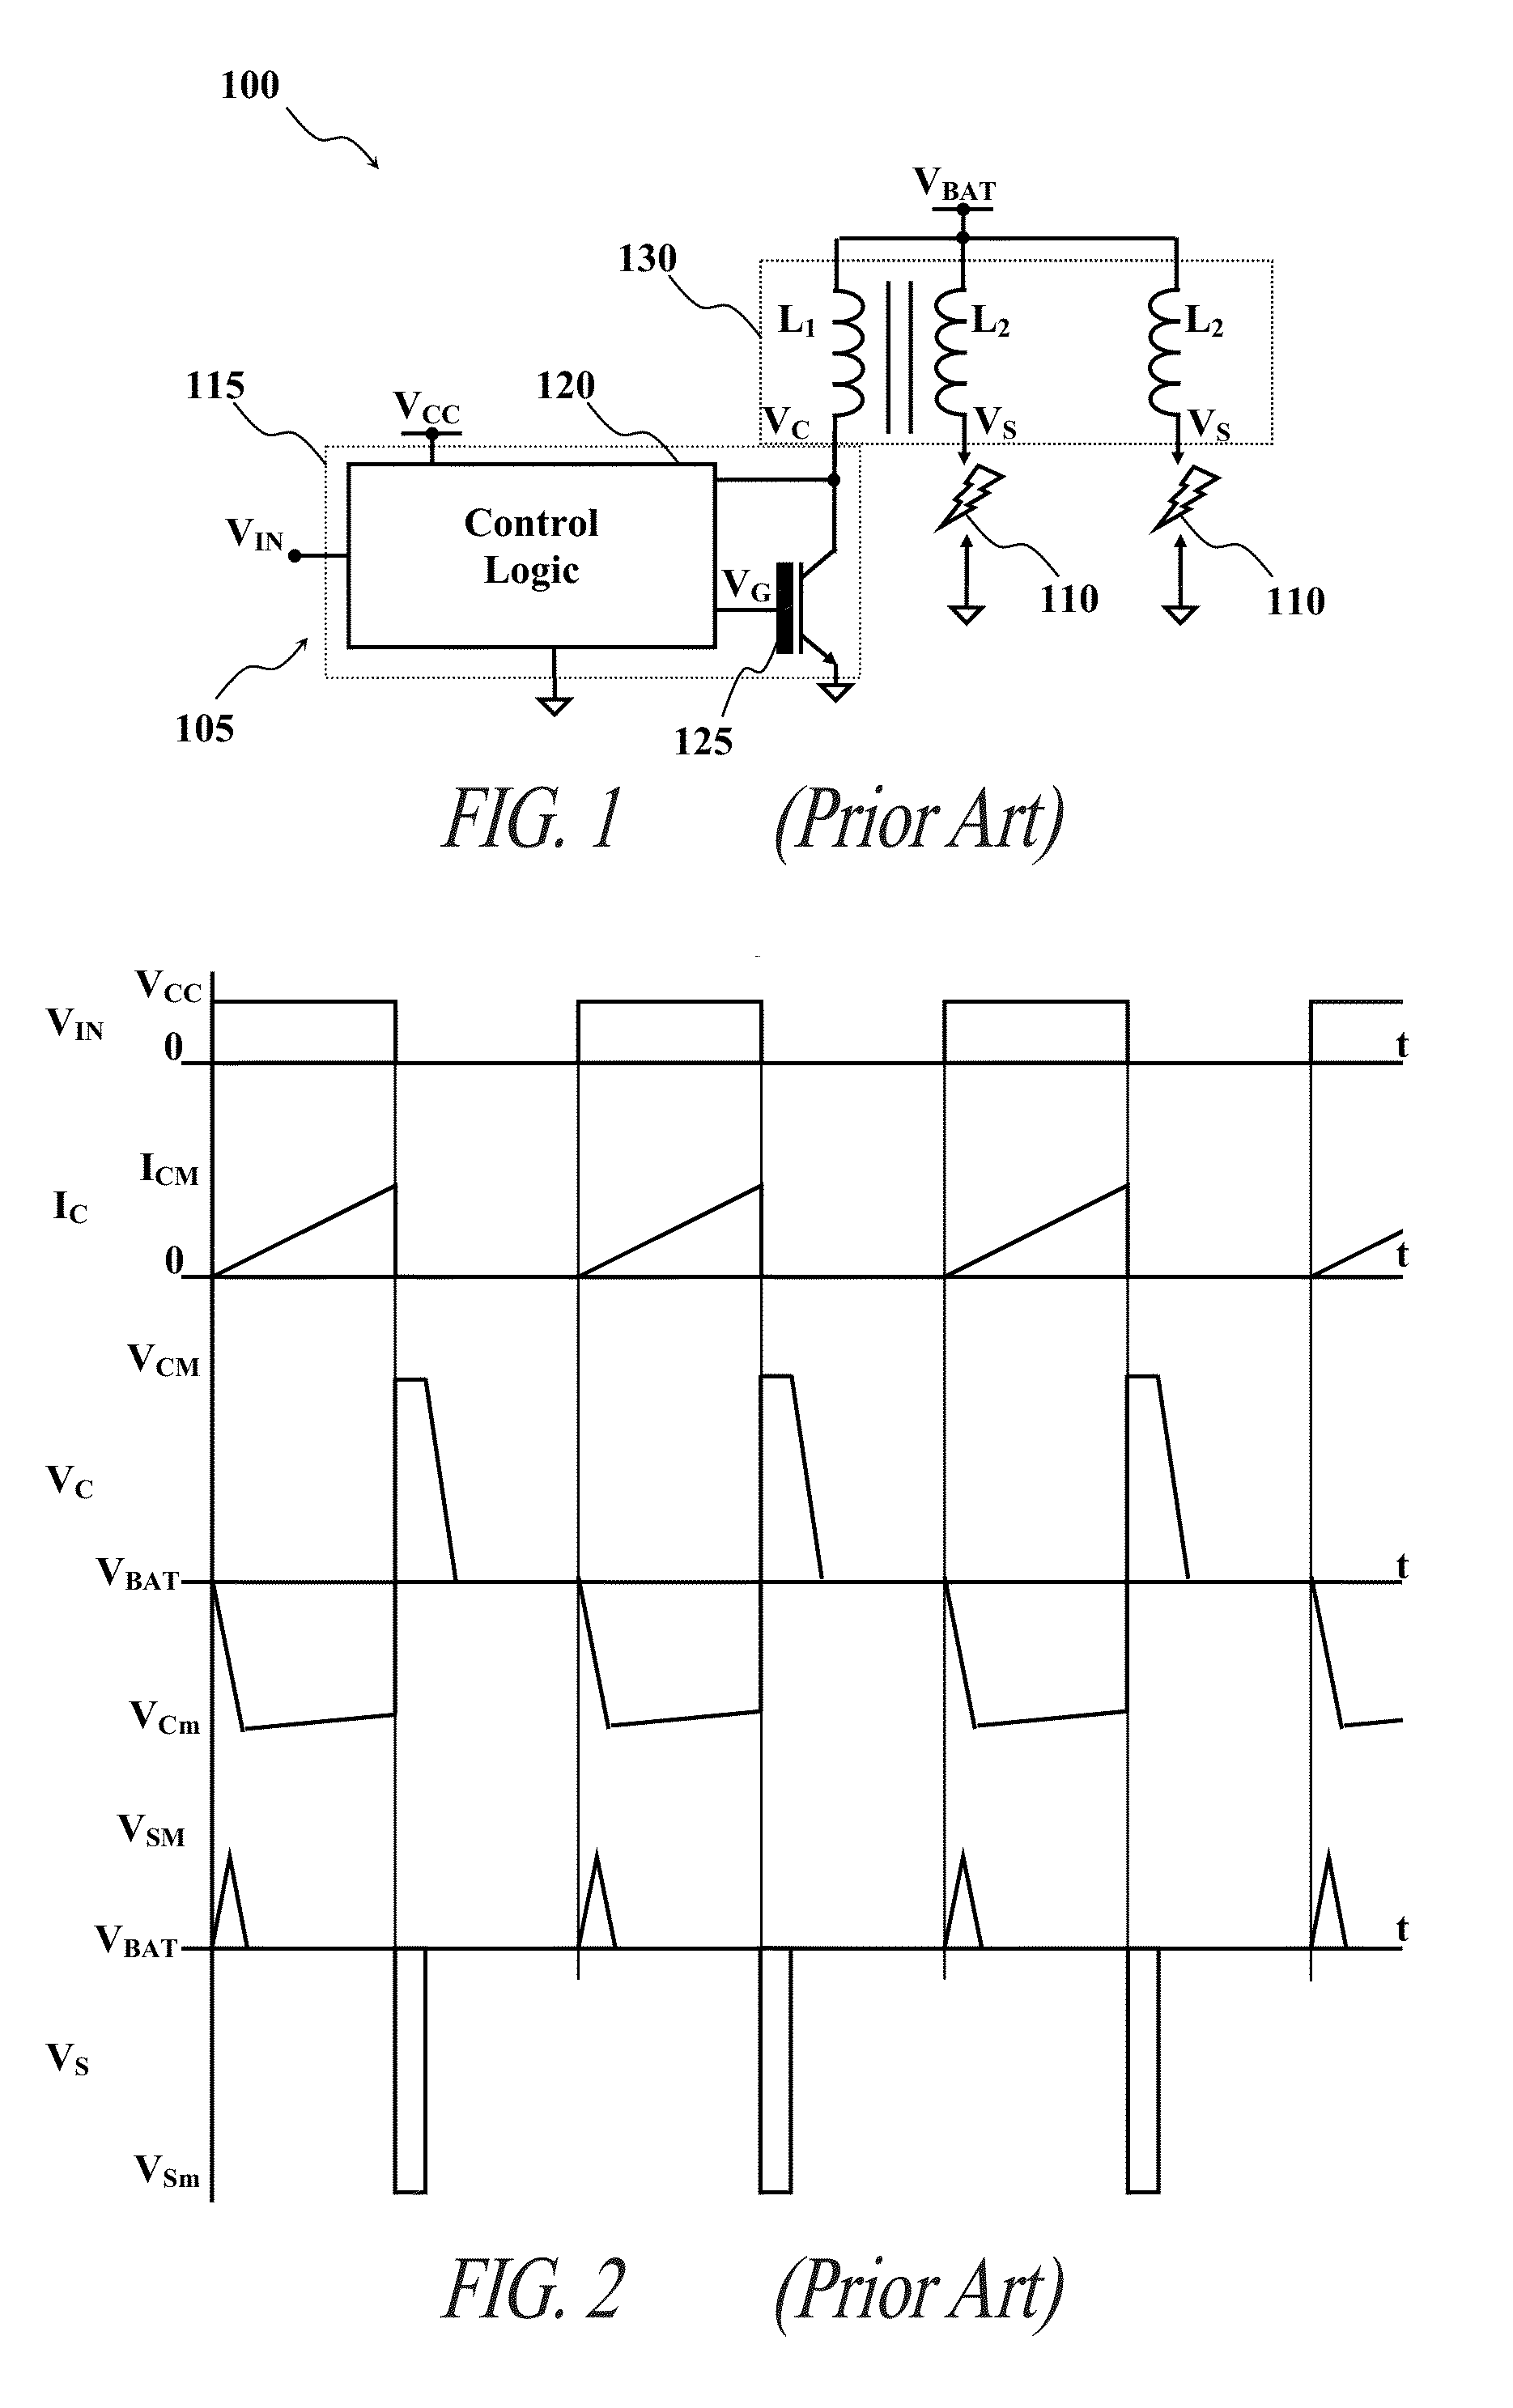 Soft turn-on in an ignition system of a combustion engine